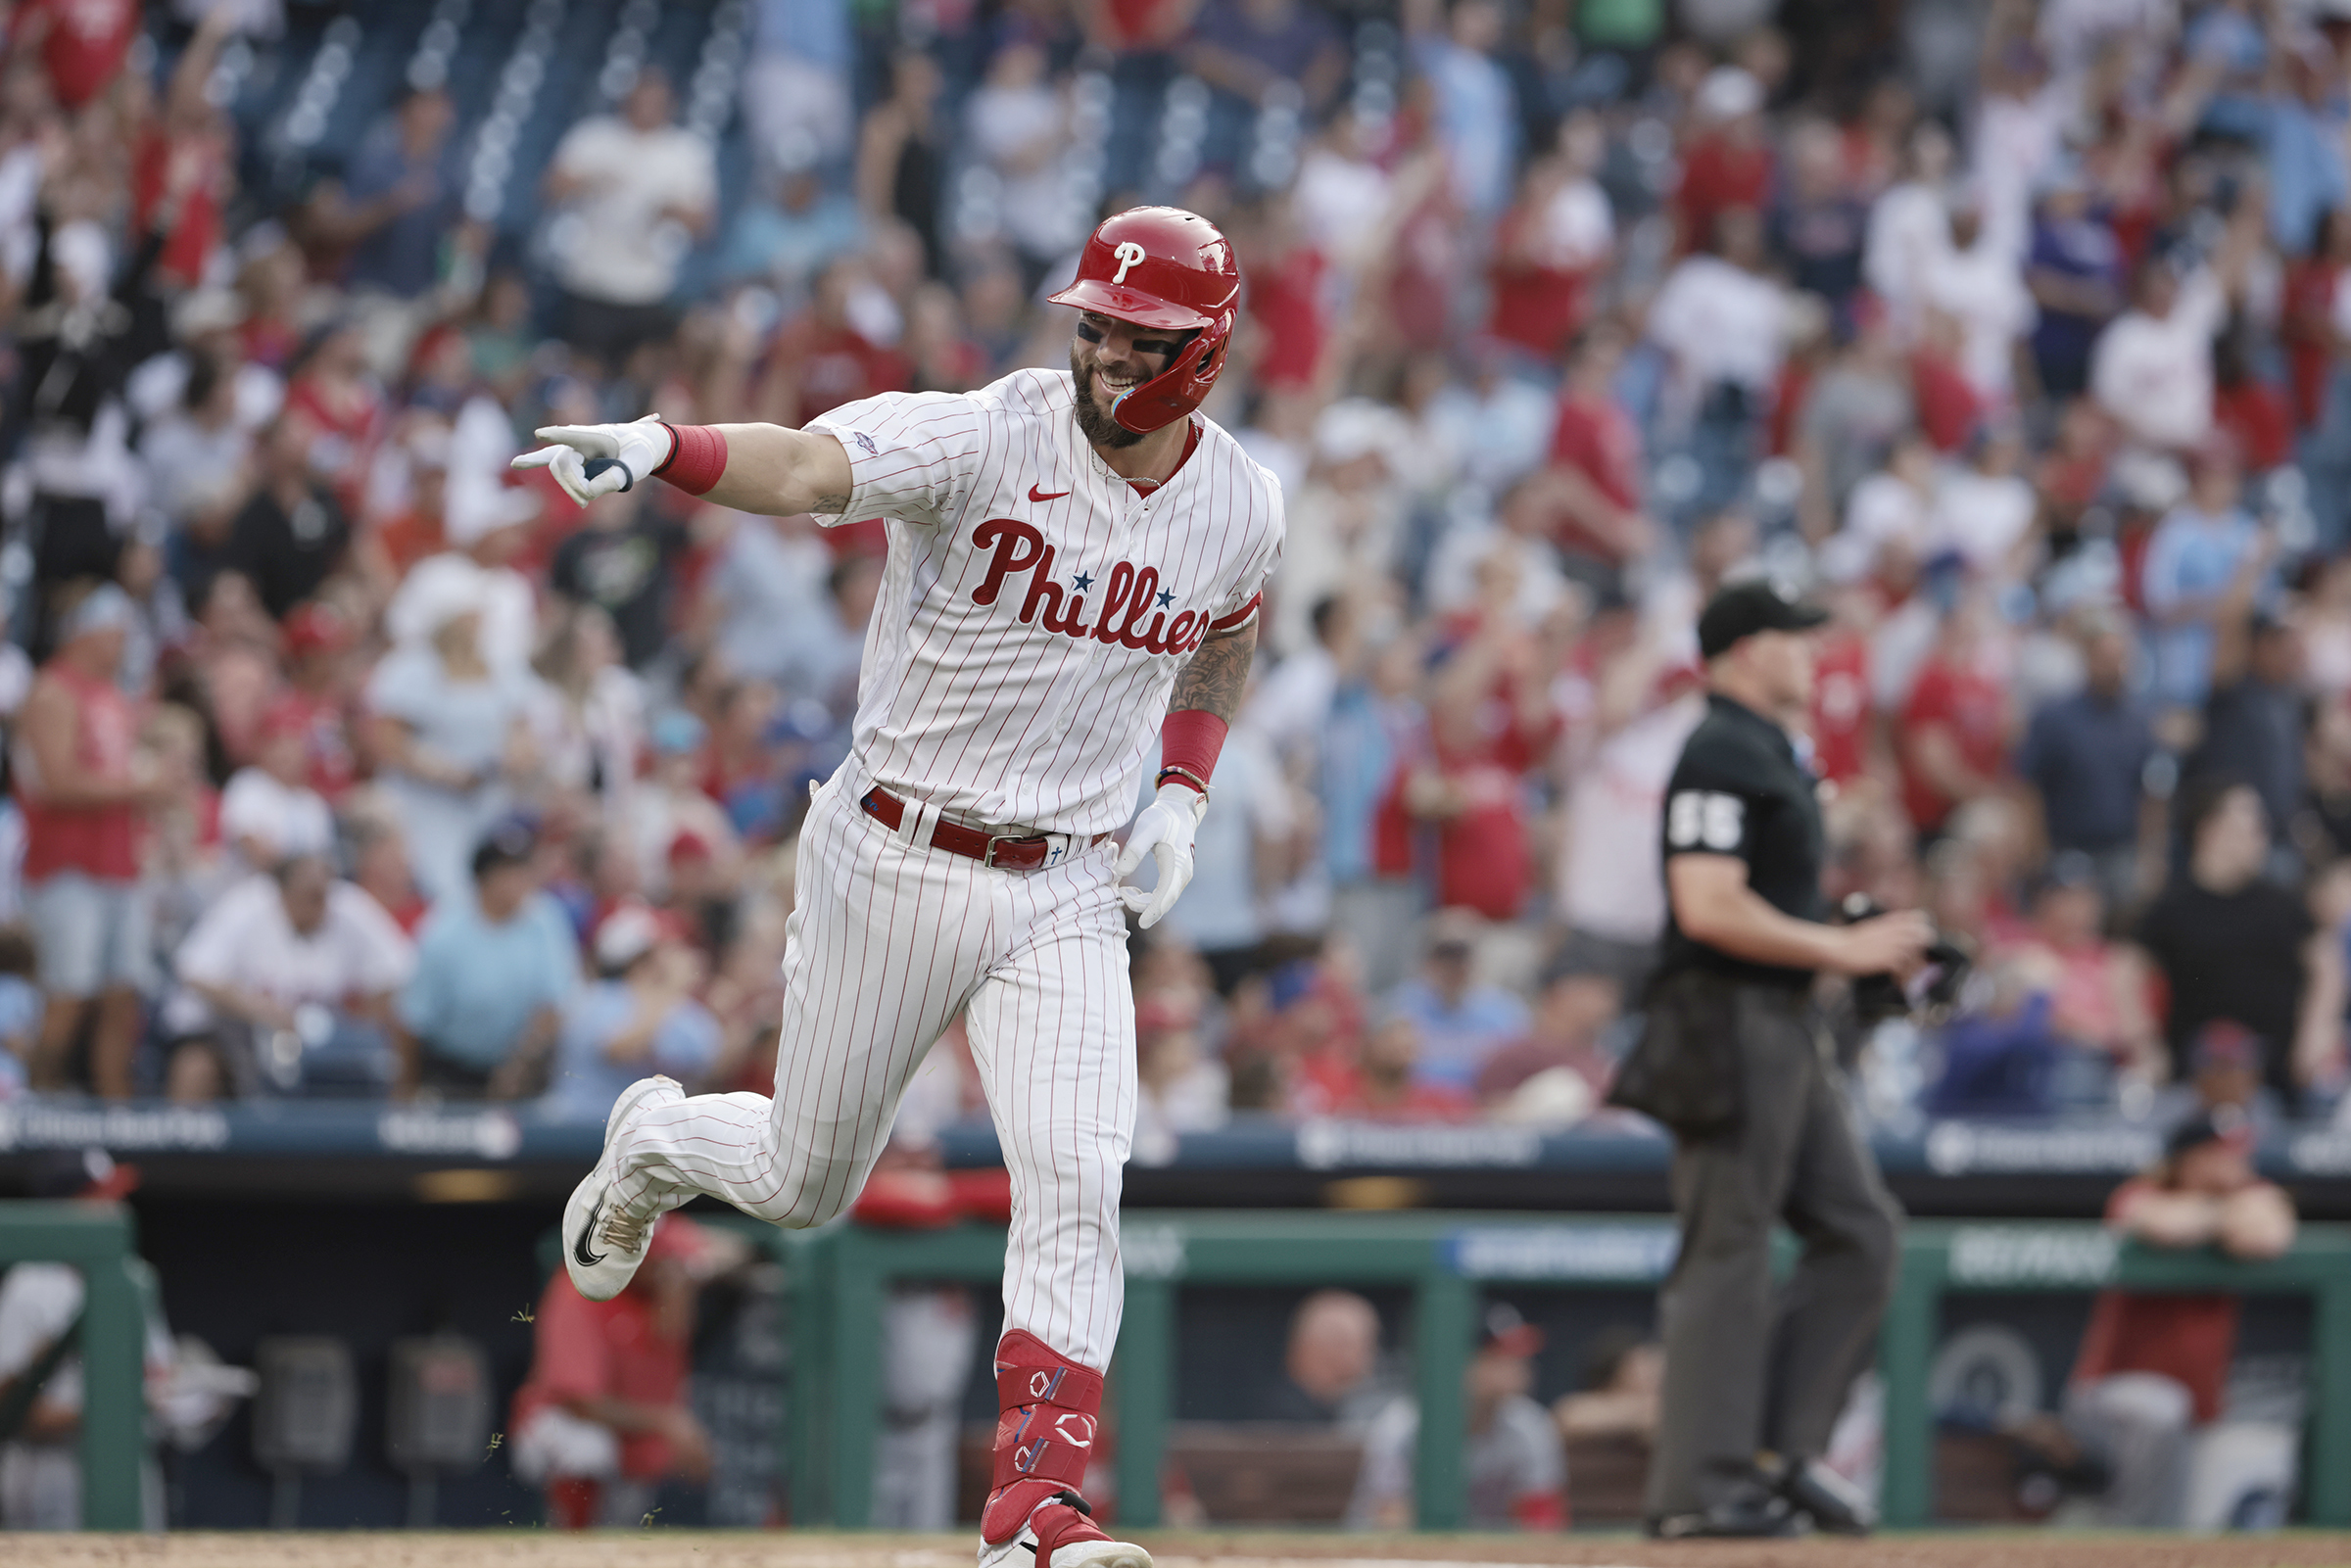 Phillies notes: A few roster moves ahead of playoffs; Weston